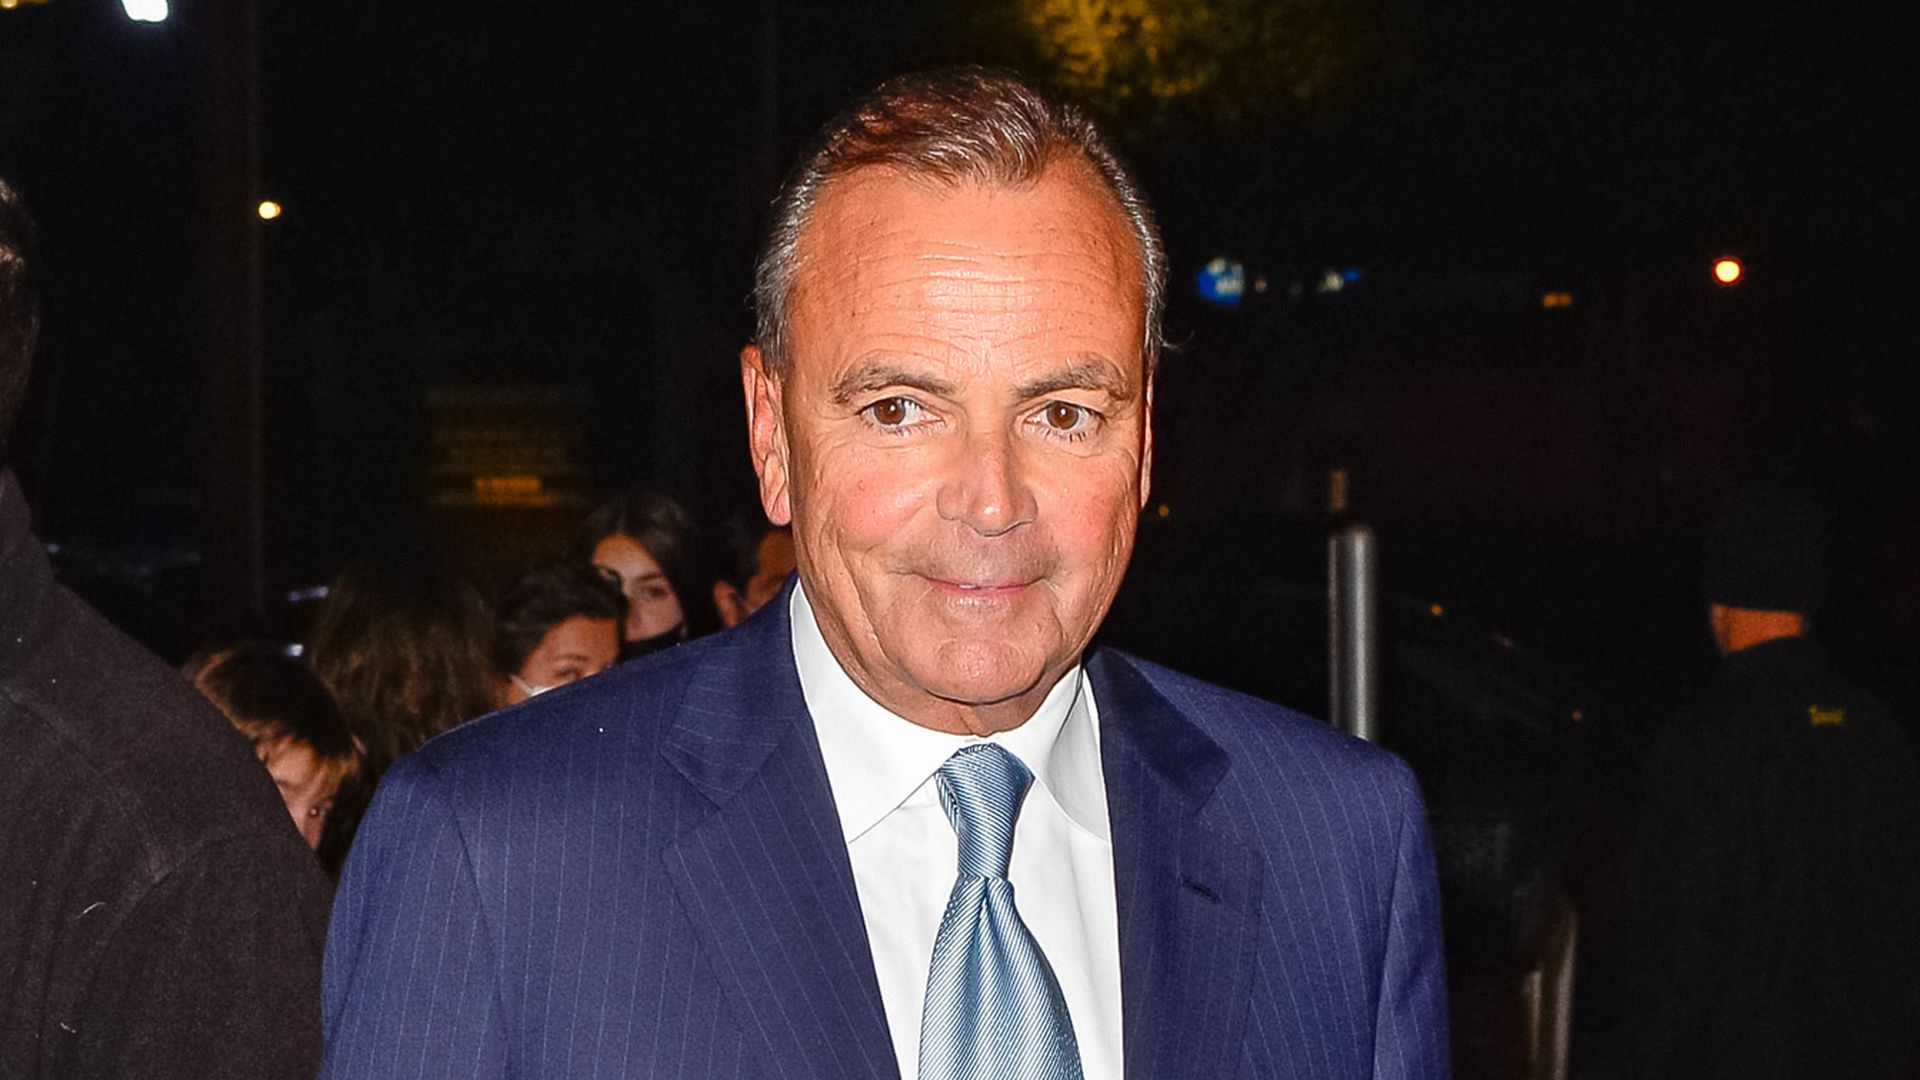 Rick Caruso in a blue suit